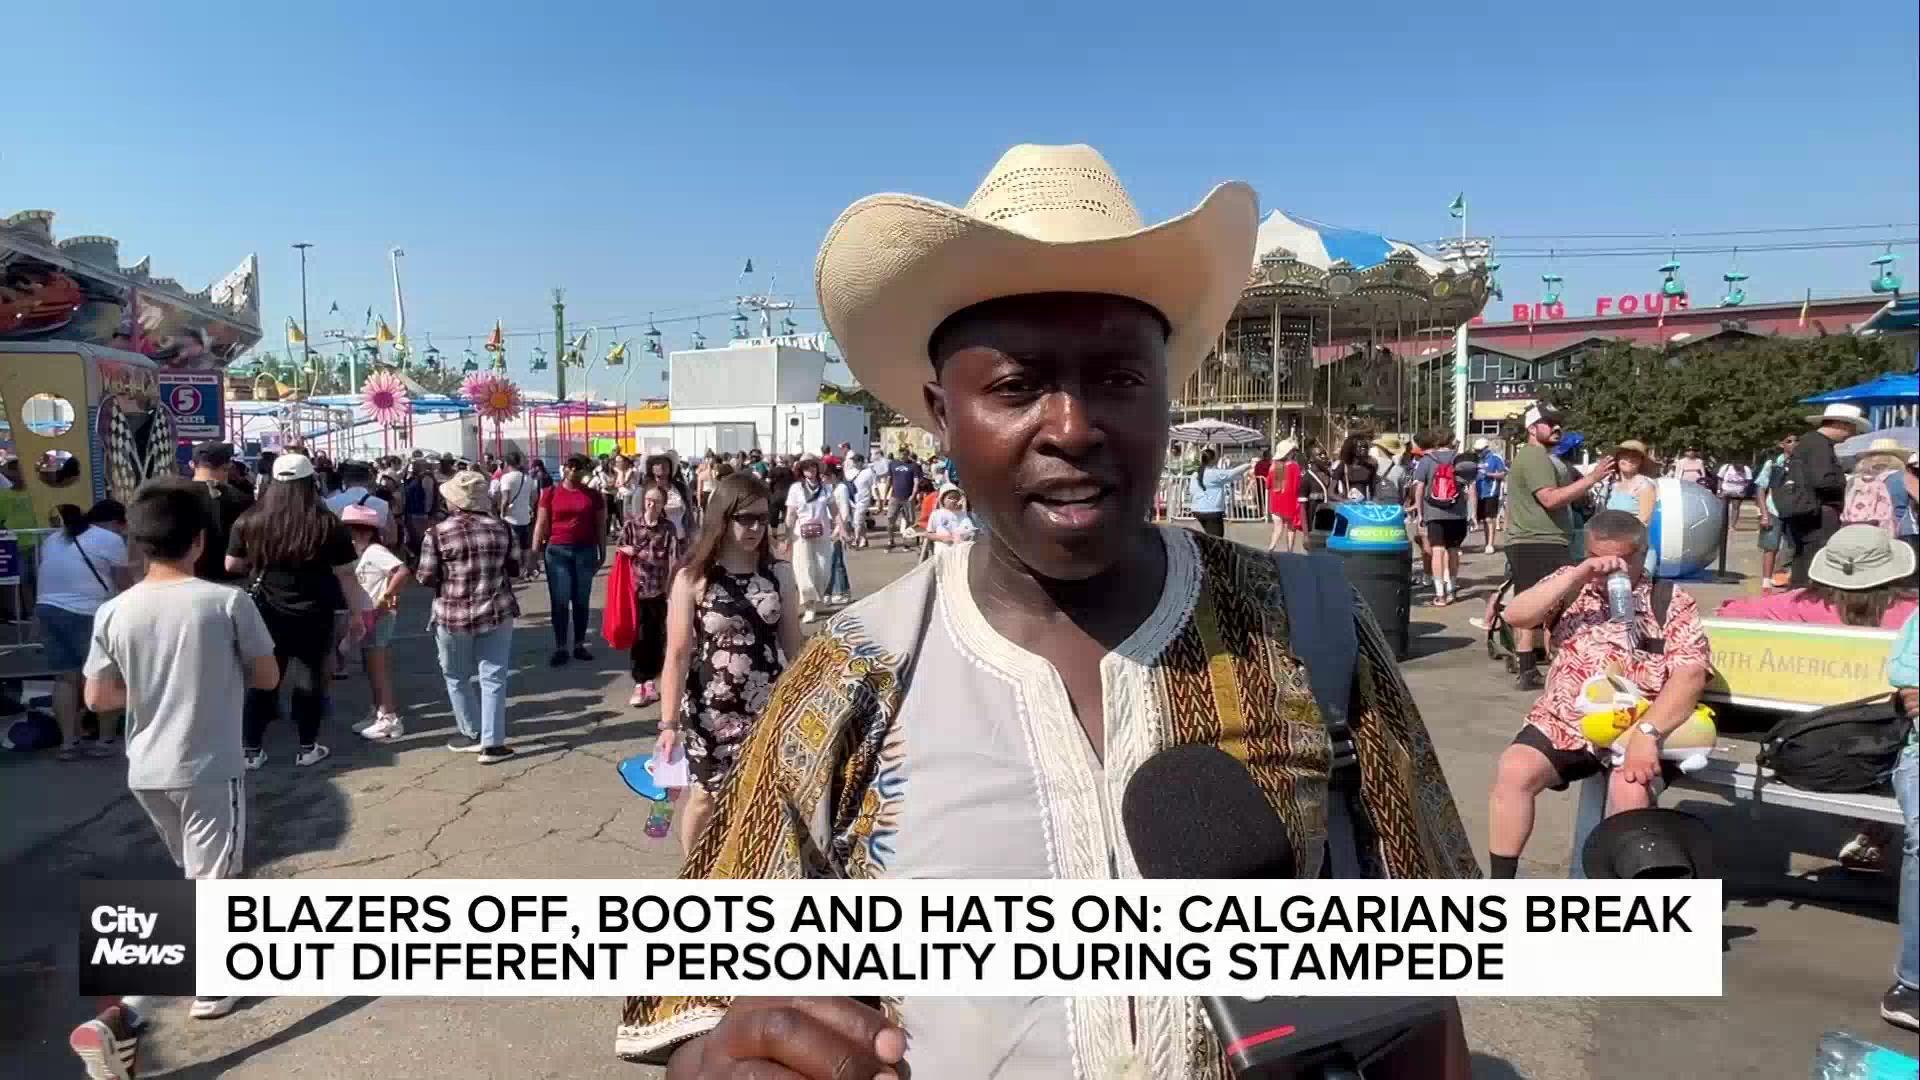 Calgarians break out different personality during Stampede